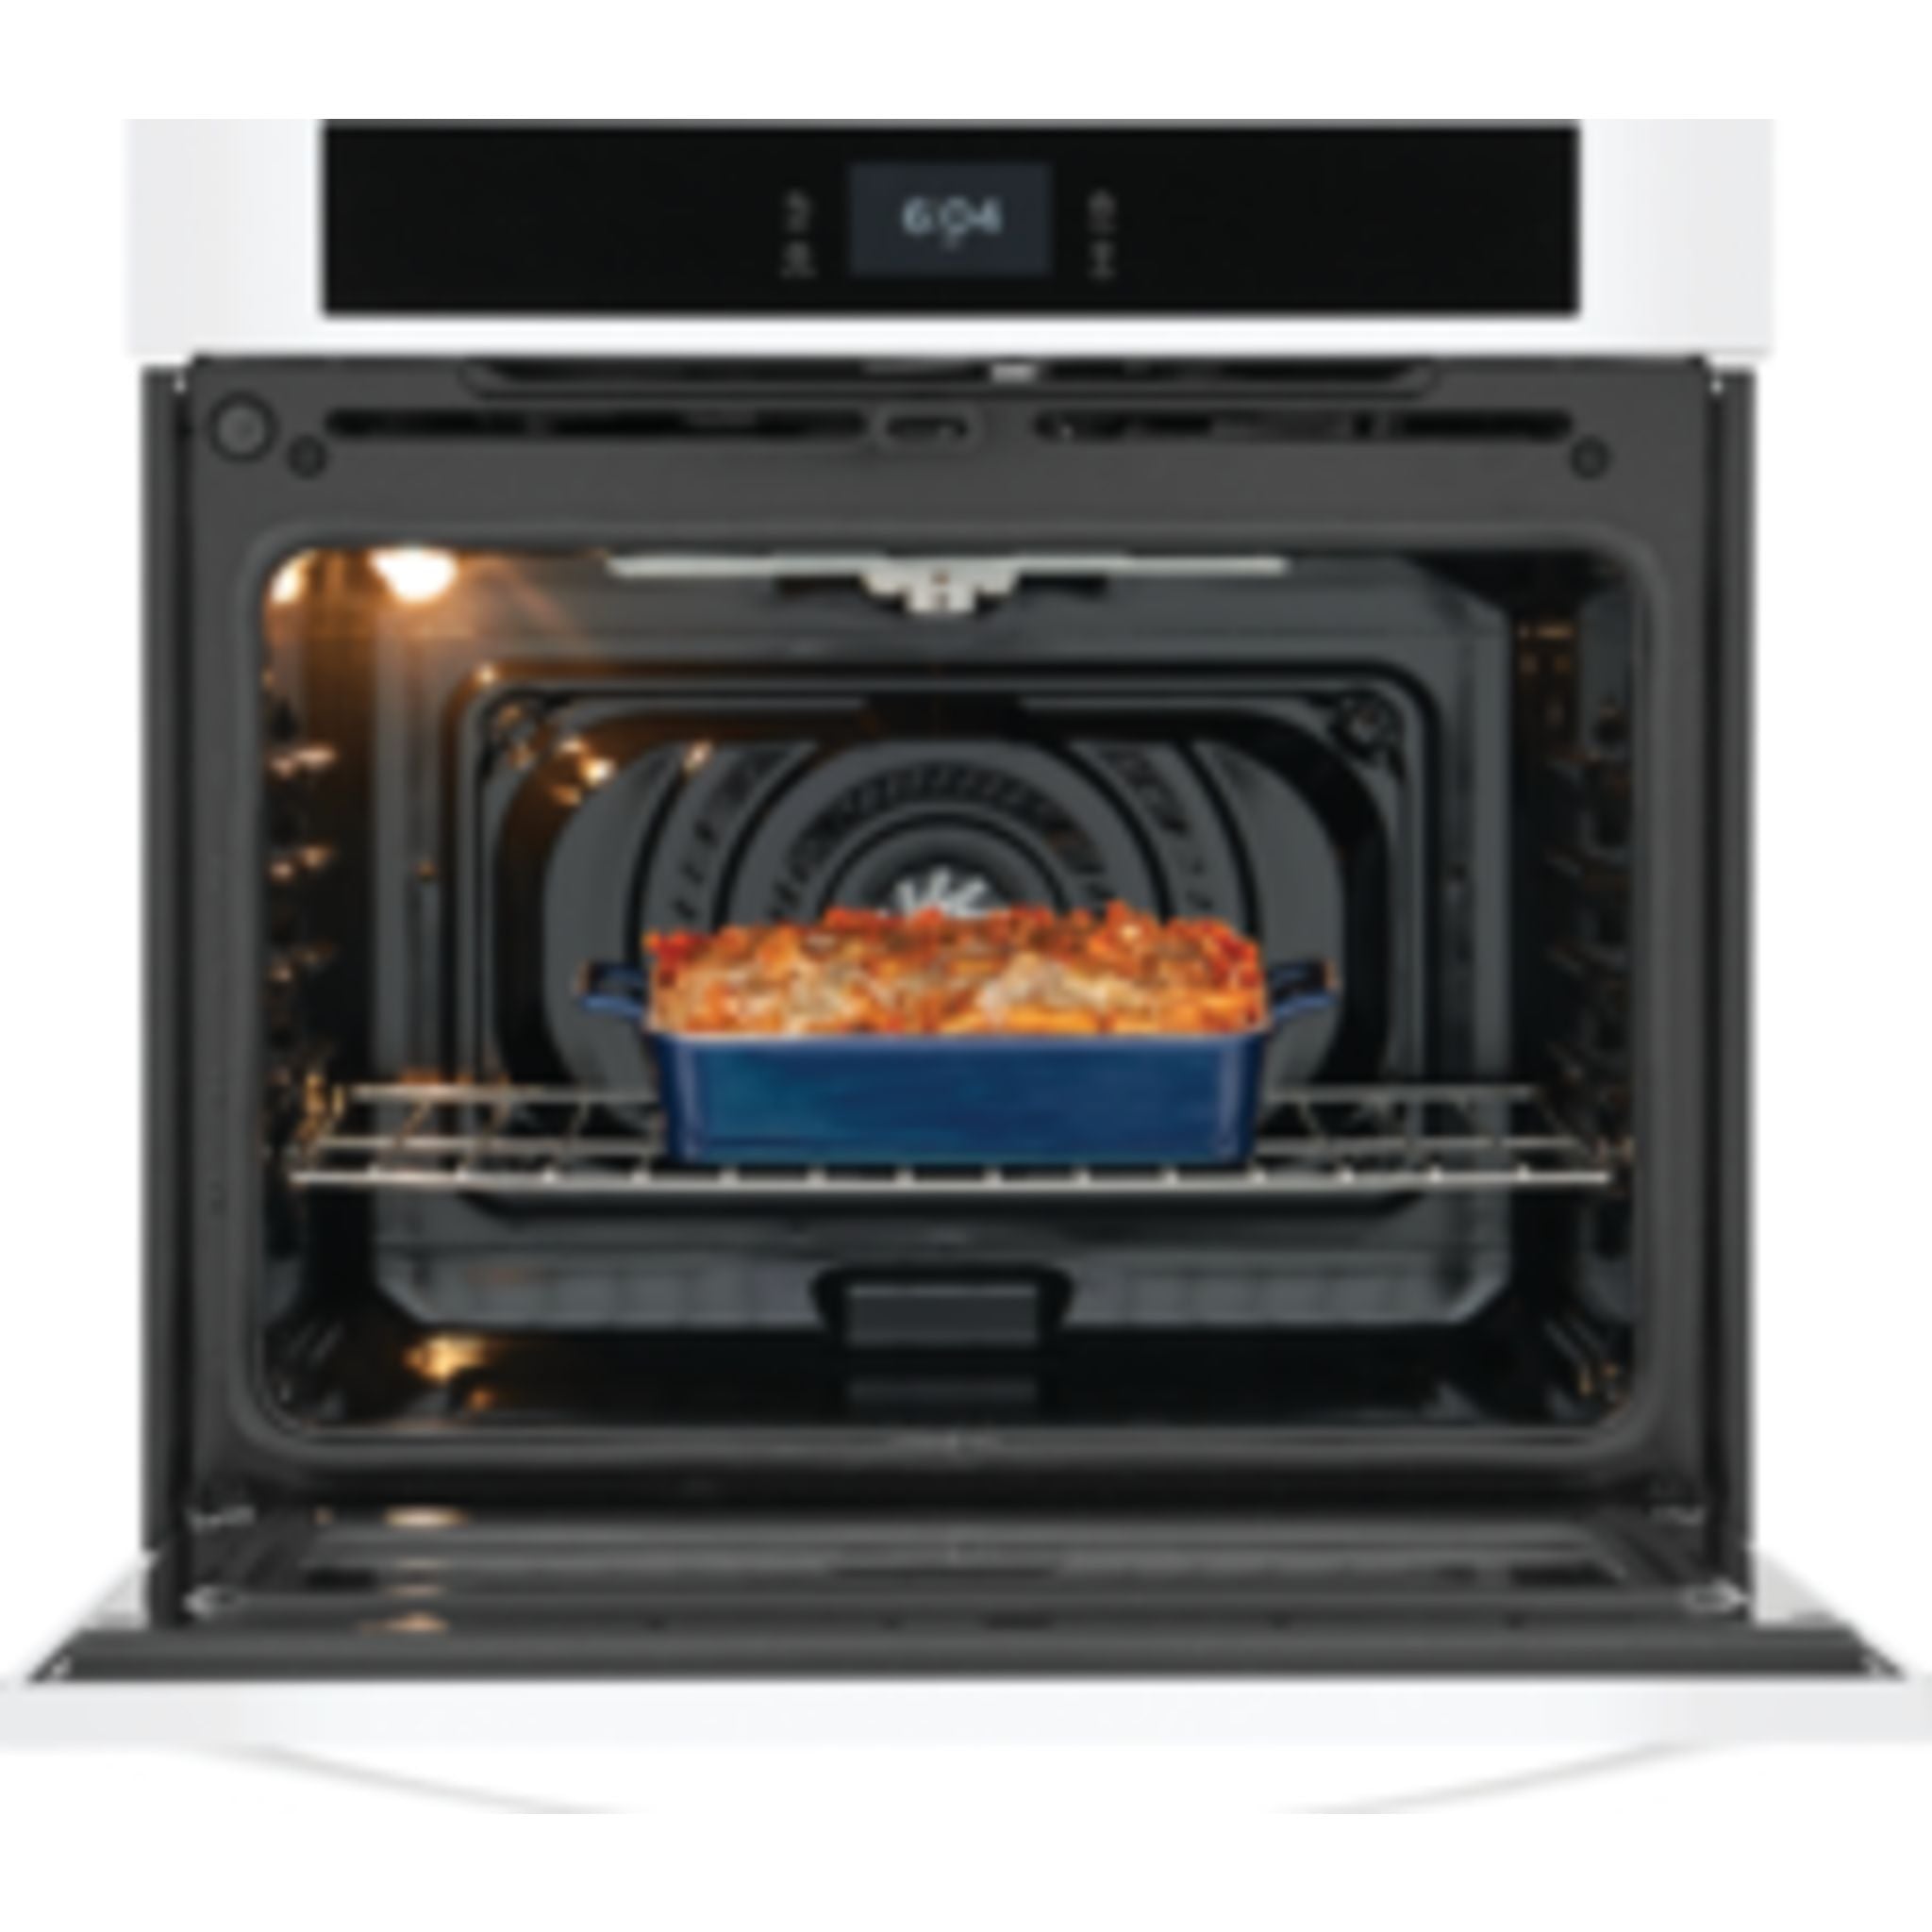 Frigidaire, Frigidaire 30" Convection Wall Oven (FCWS3027AW) - White